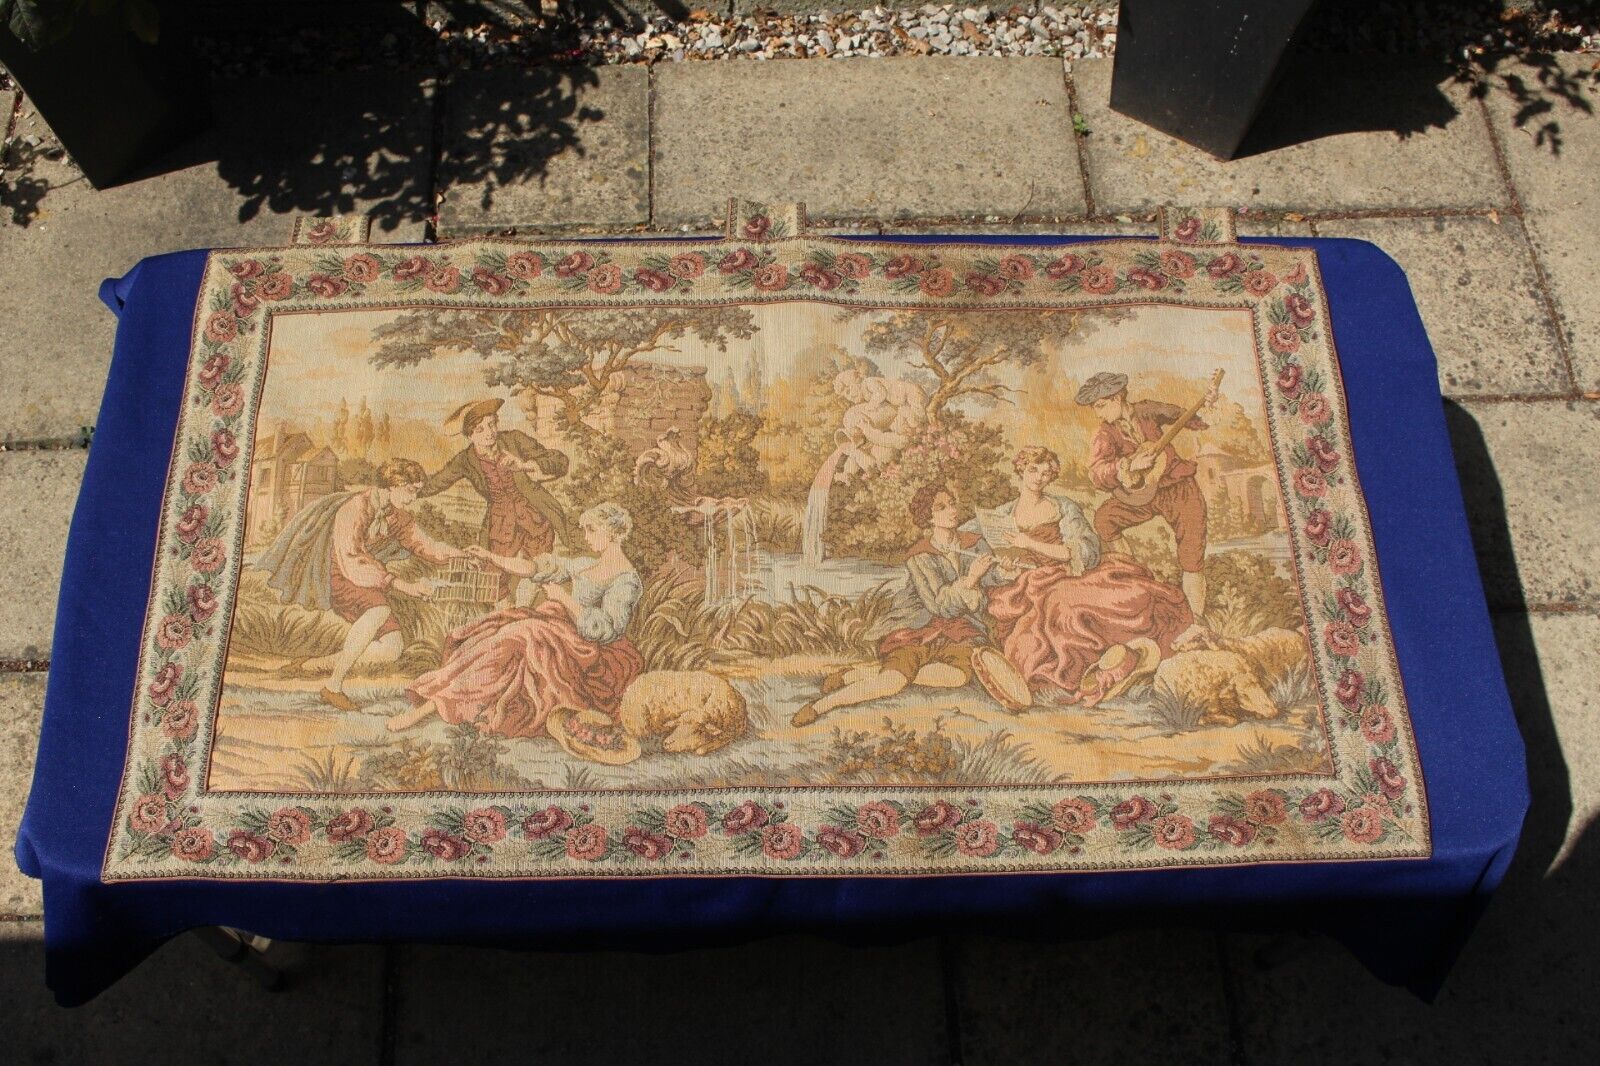 Antique wall hanging tapestry romantic scene great decorative piece